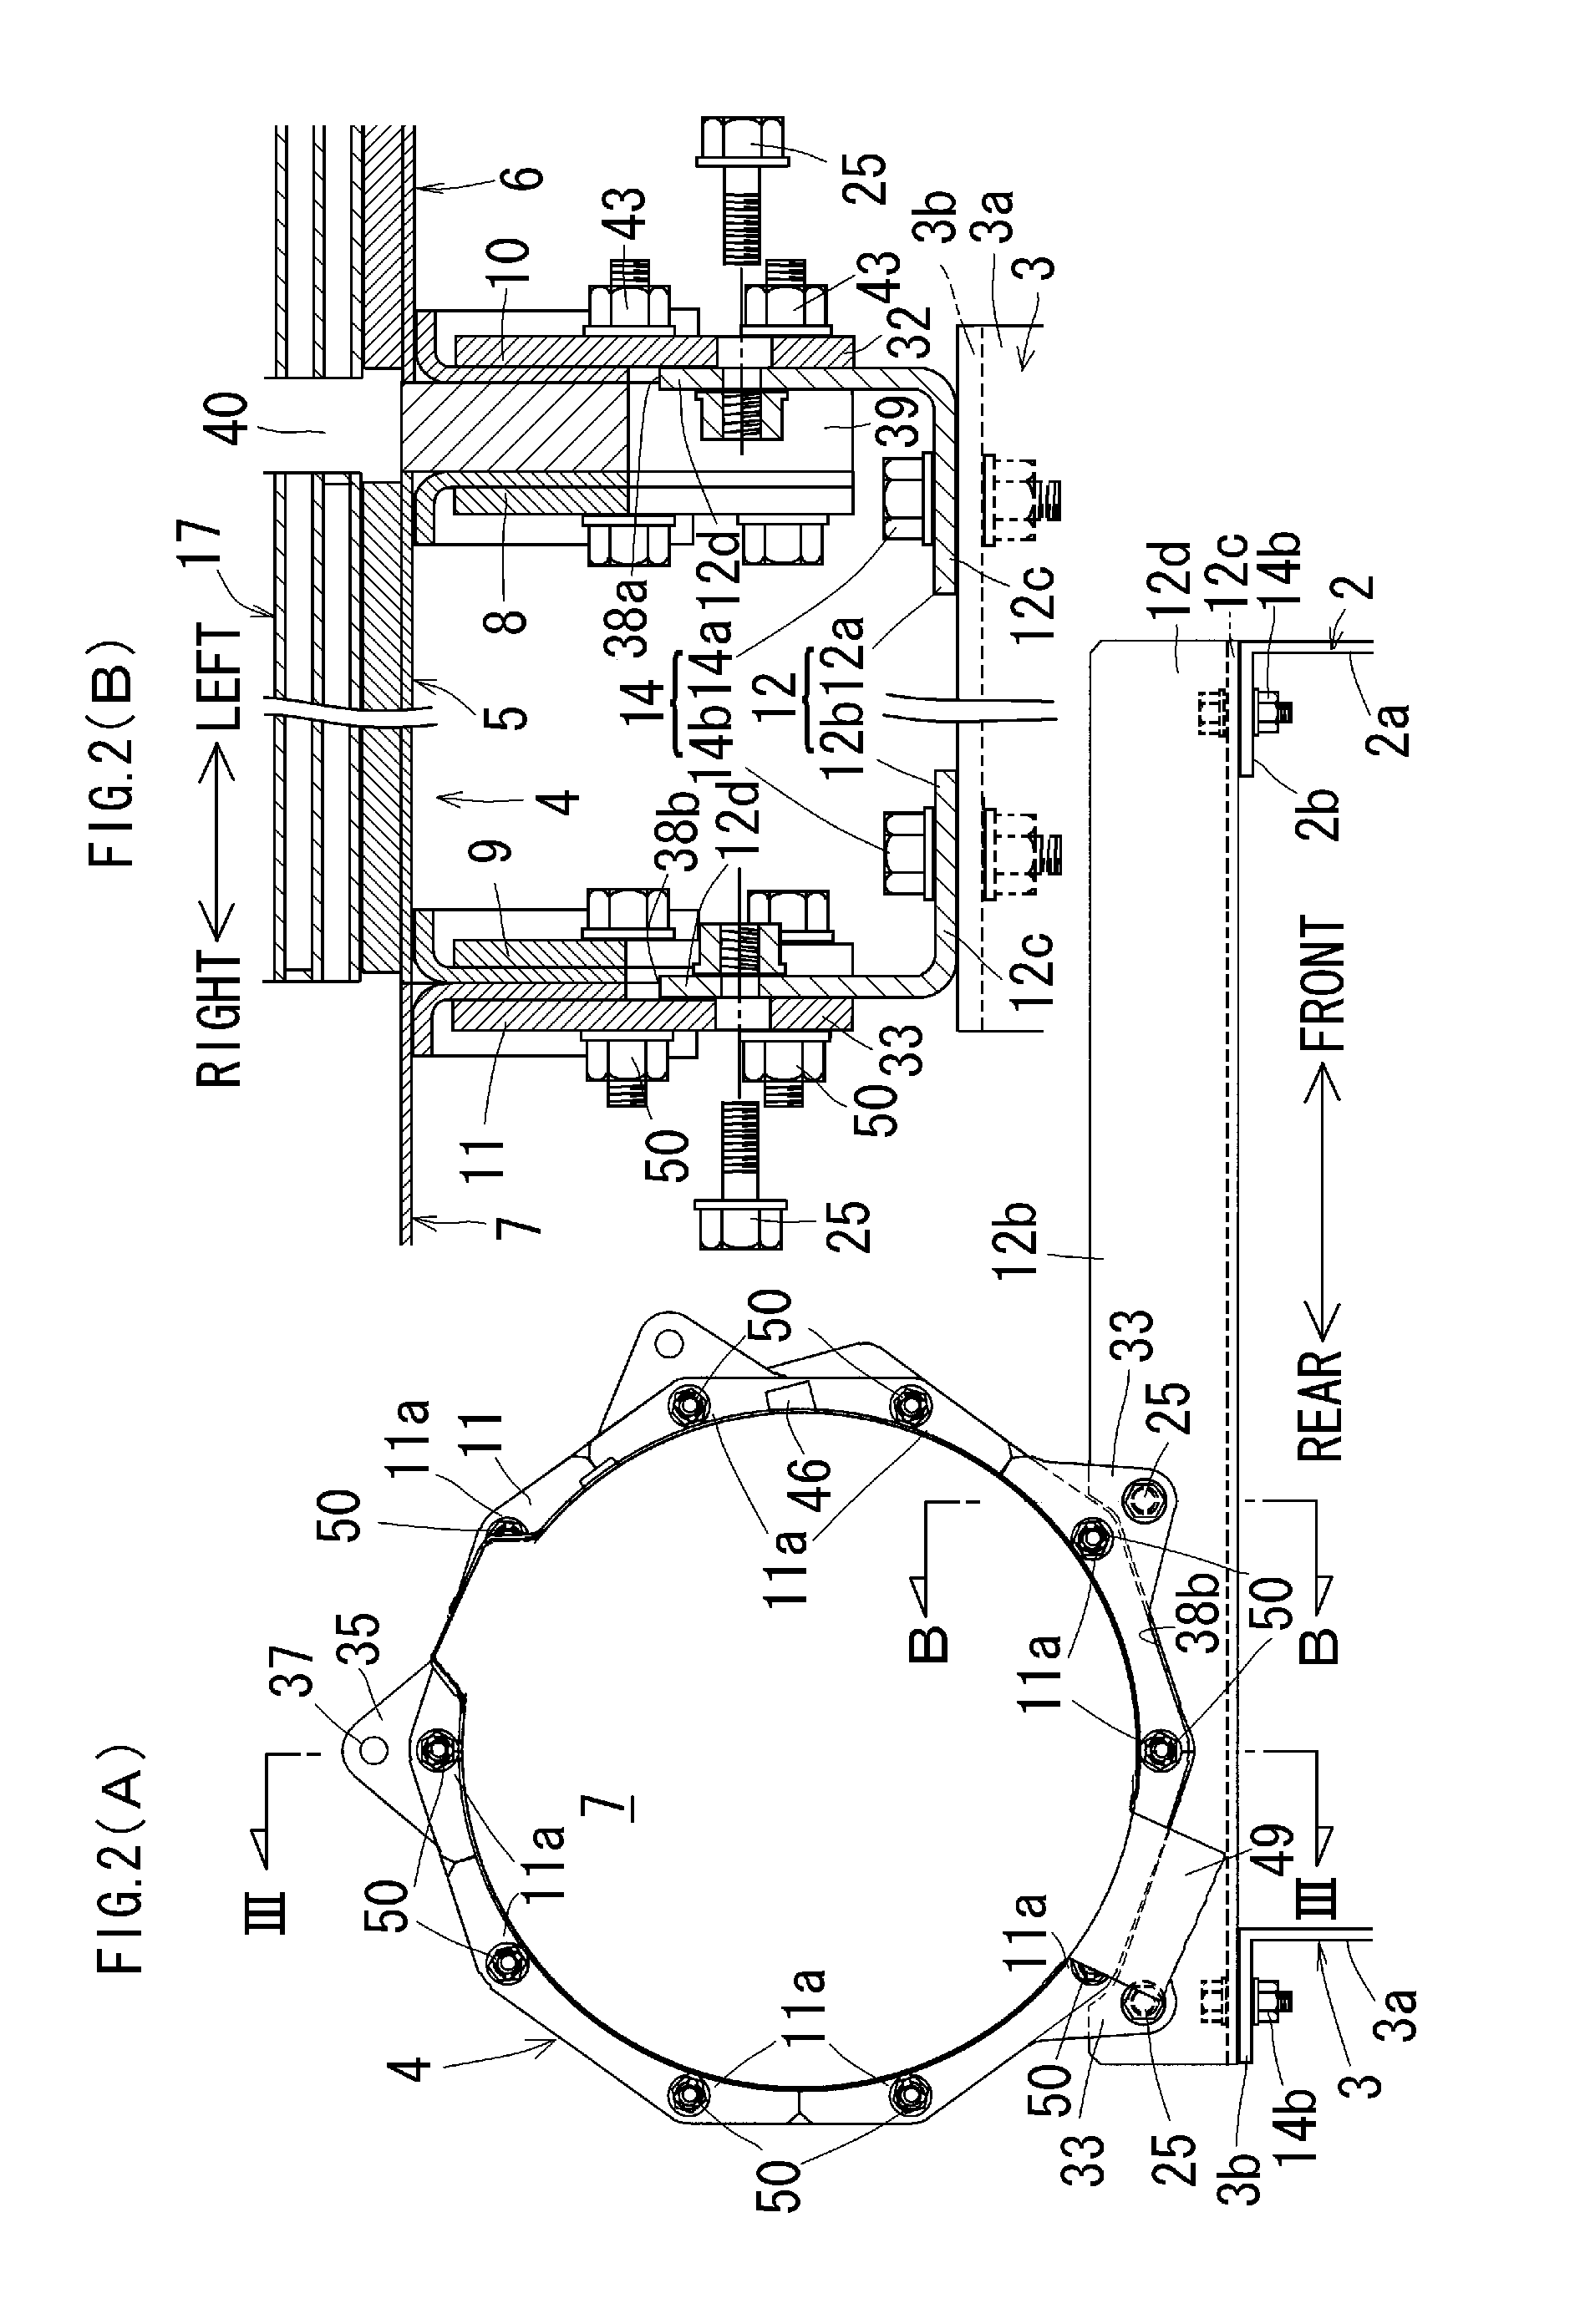 Engine with exhaust gas treatment apparatus